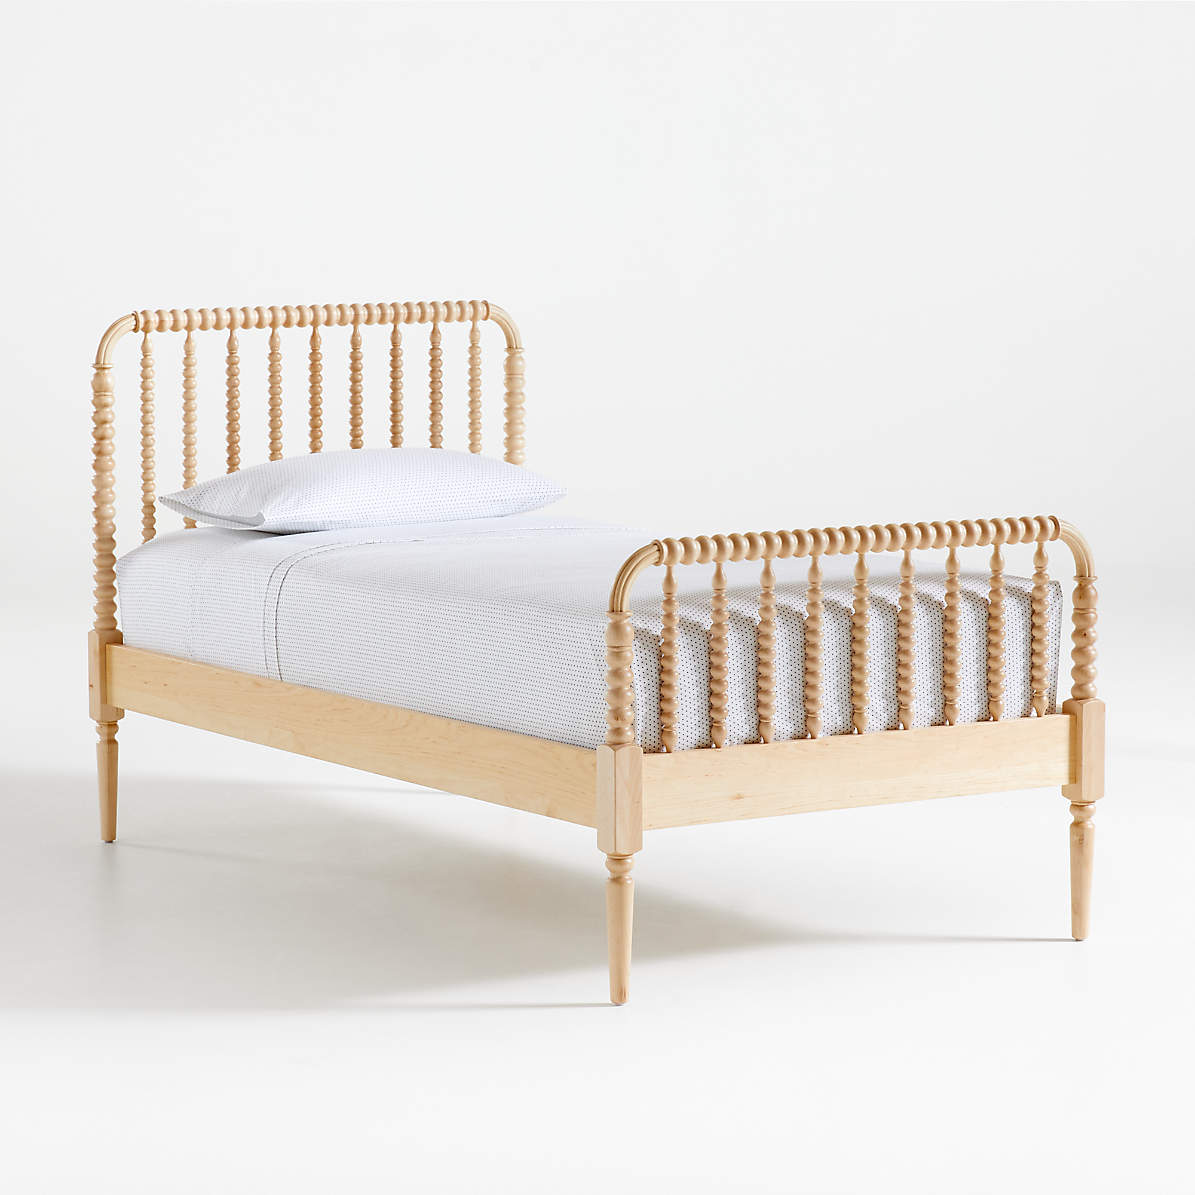 Jenny Lind Kids Maple Spindle Bed, Crate And Barrel Bunk Beds